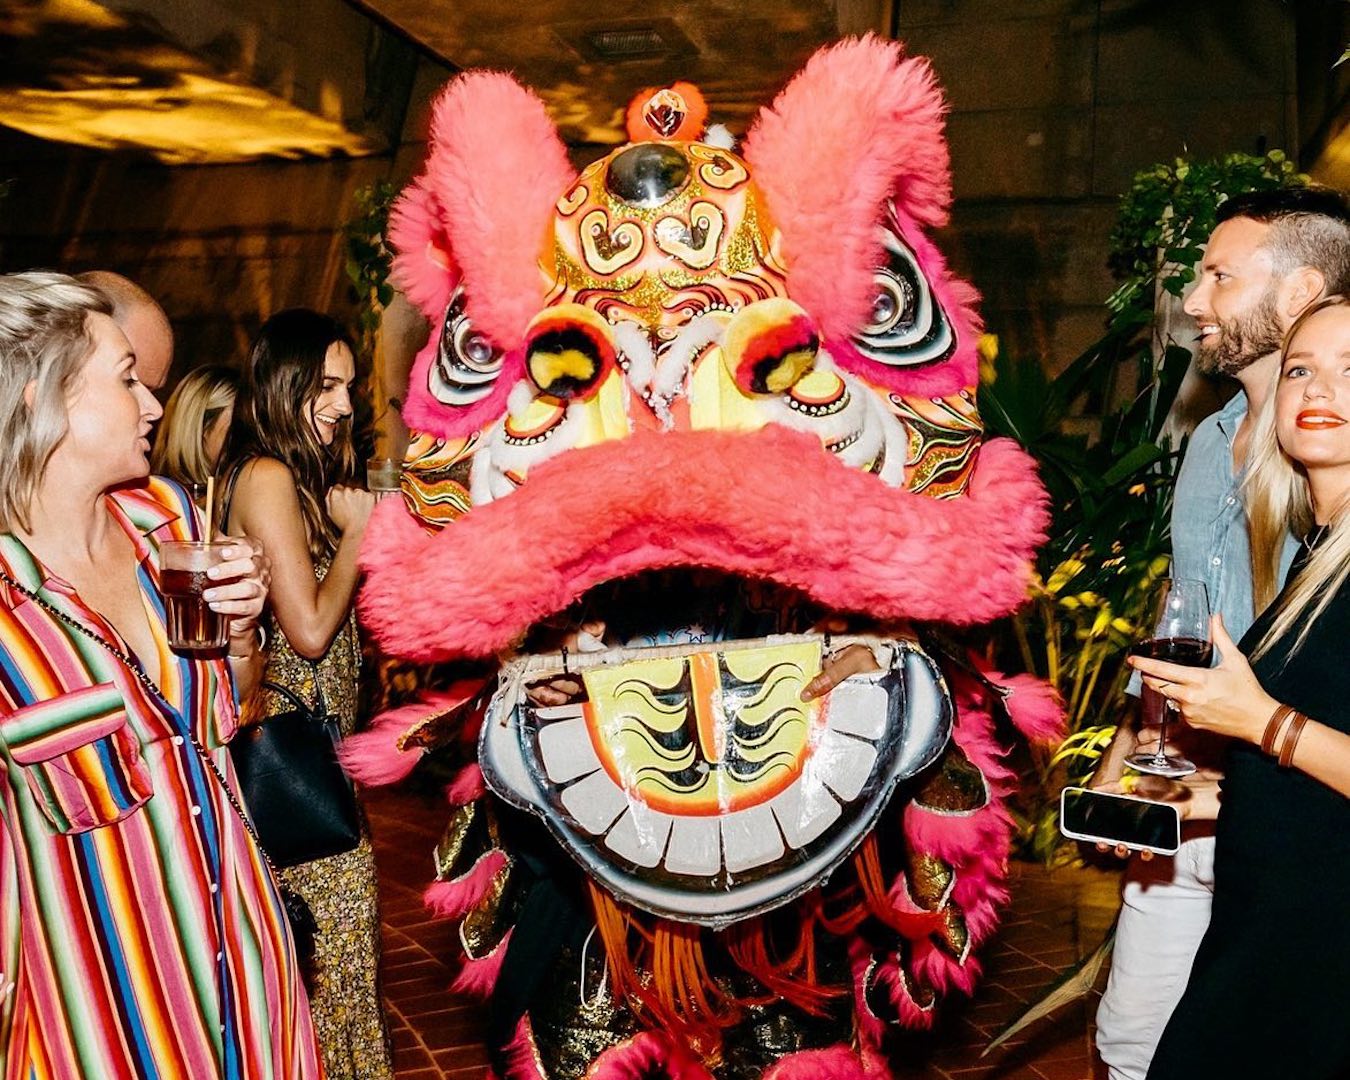 A traditional lion dancer approached the camera surrounded by people dancing.